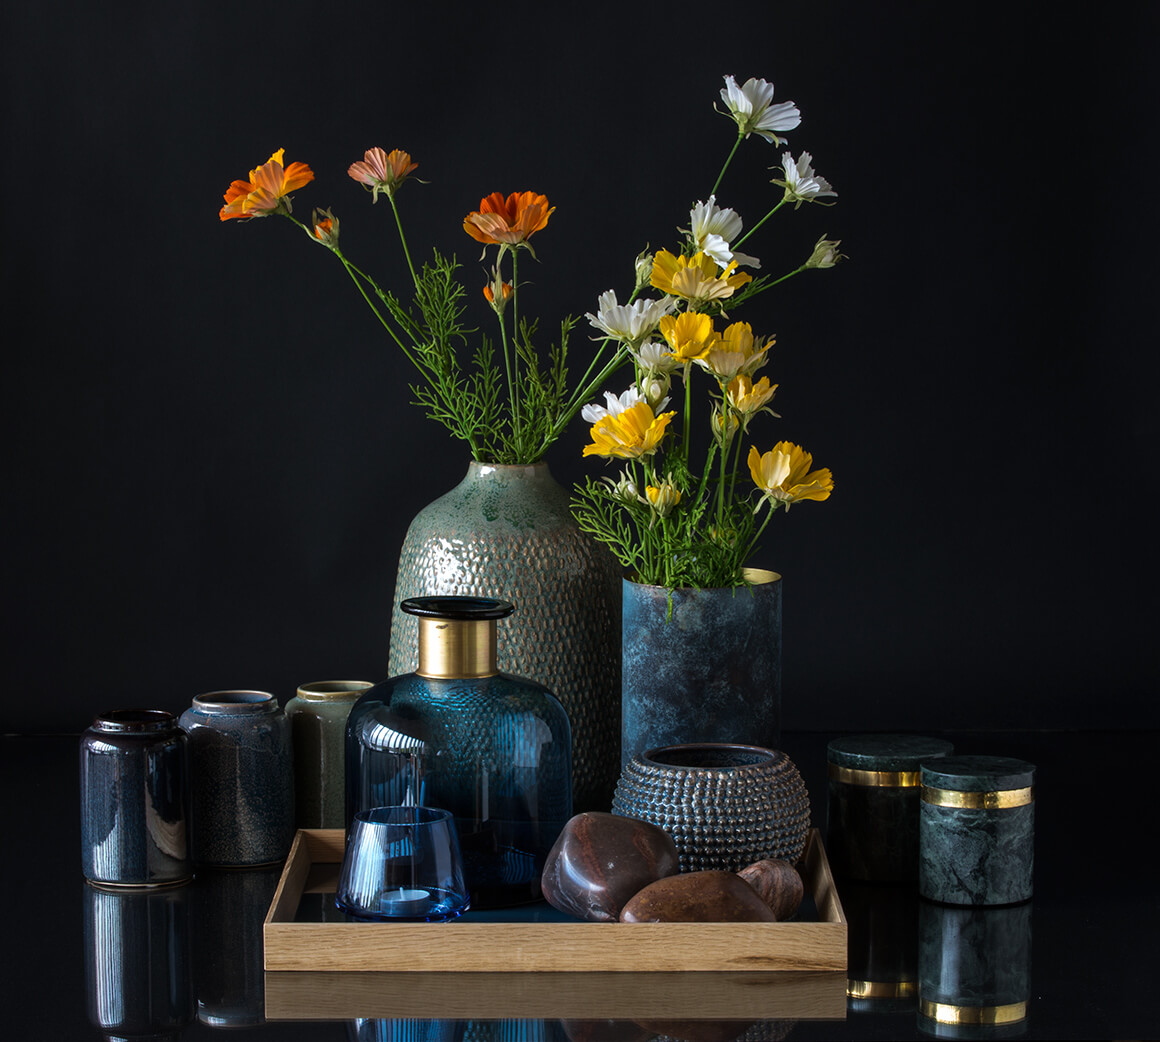 Country home decor with ceramics and glass vases